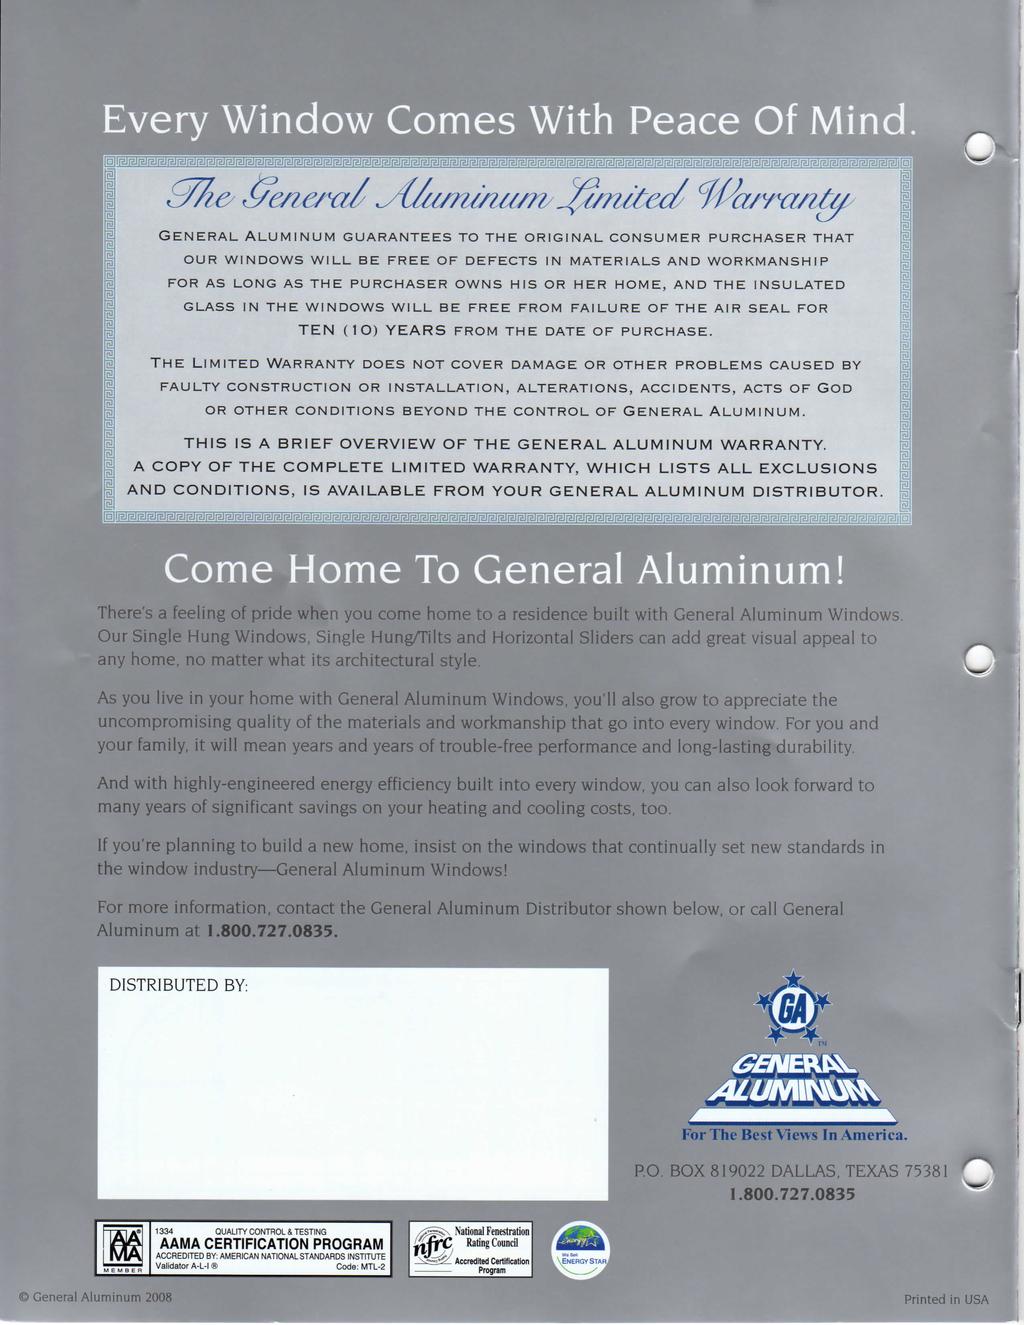 Every Window Comes With Peace Of Mind E[fg]EIBIE]EJ]EIBBlBlBlBlBS Come Home To General Aluminum! There's a feeling of pride when you come home to a residence built with General Aluminum Windows.